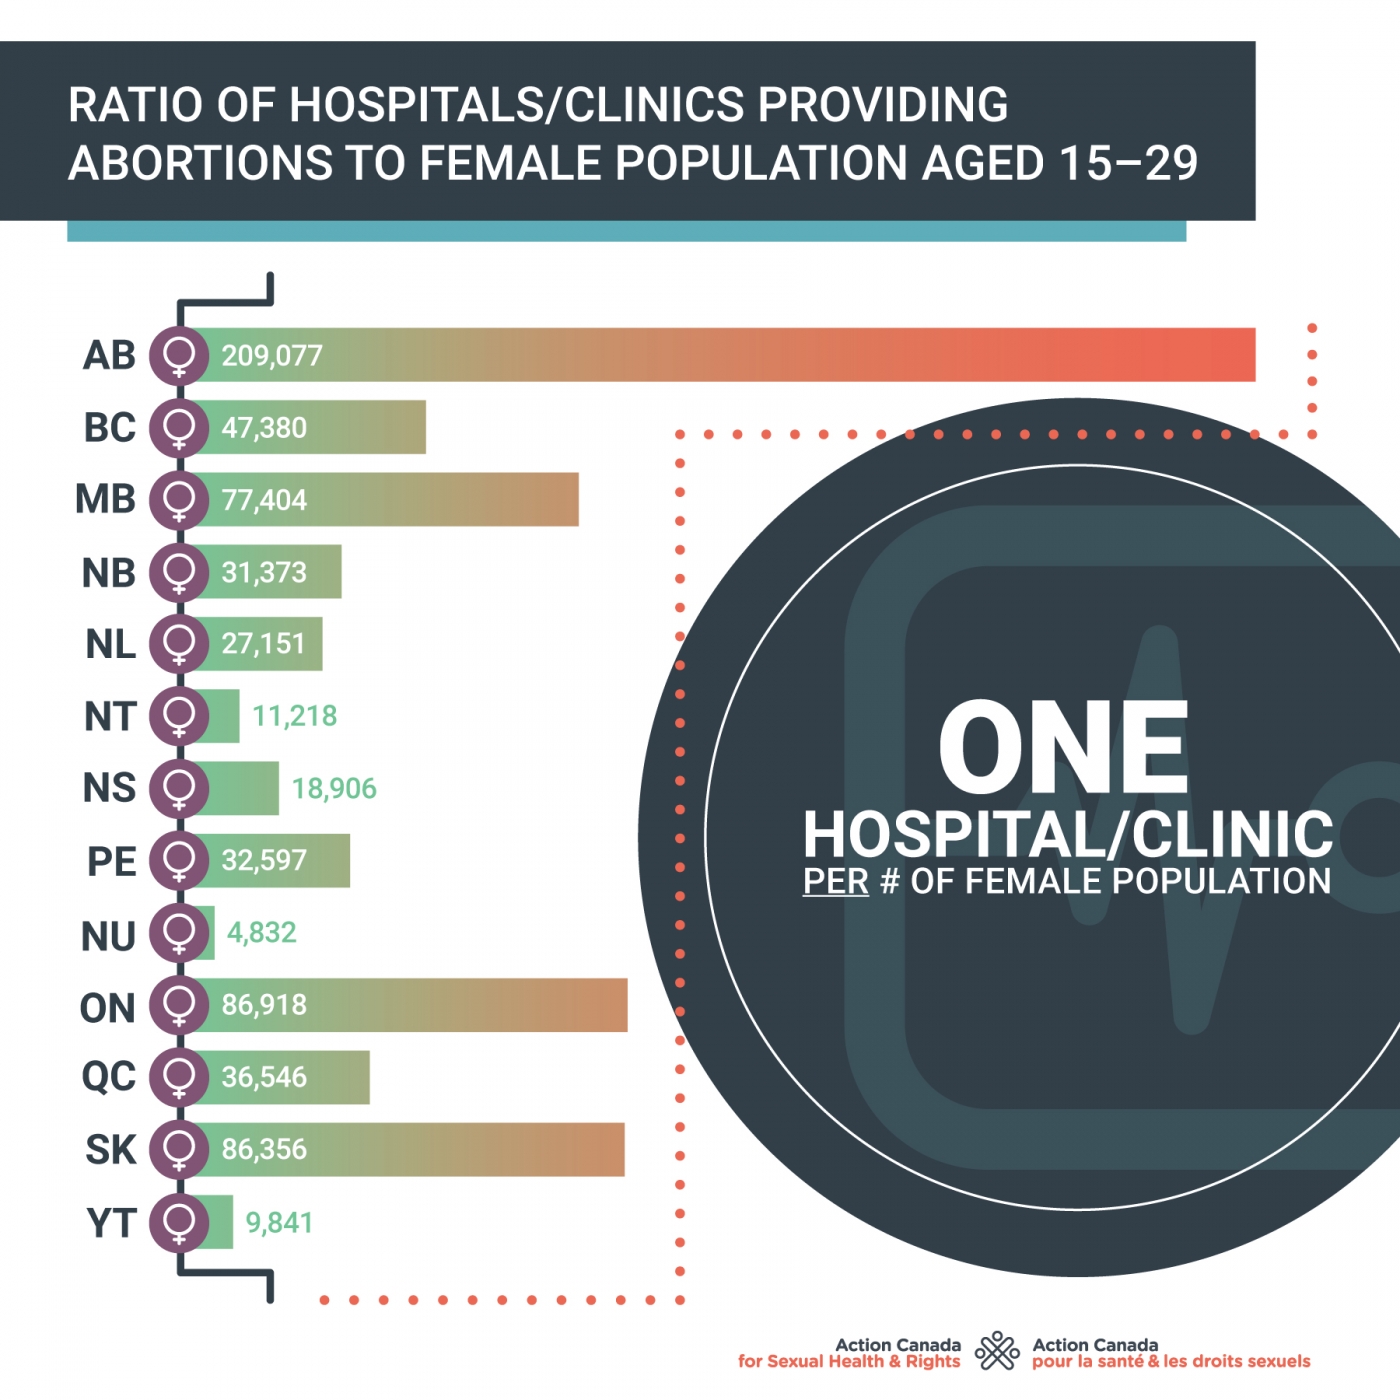 Chart showing the ratio of hospitals and clinics providing abortion to the female population aged 15-29